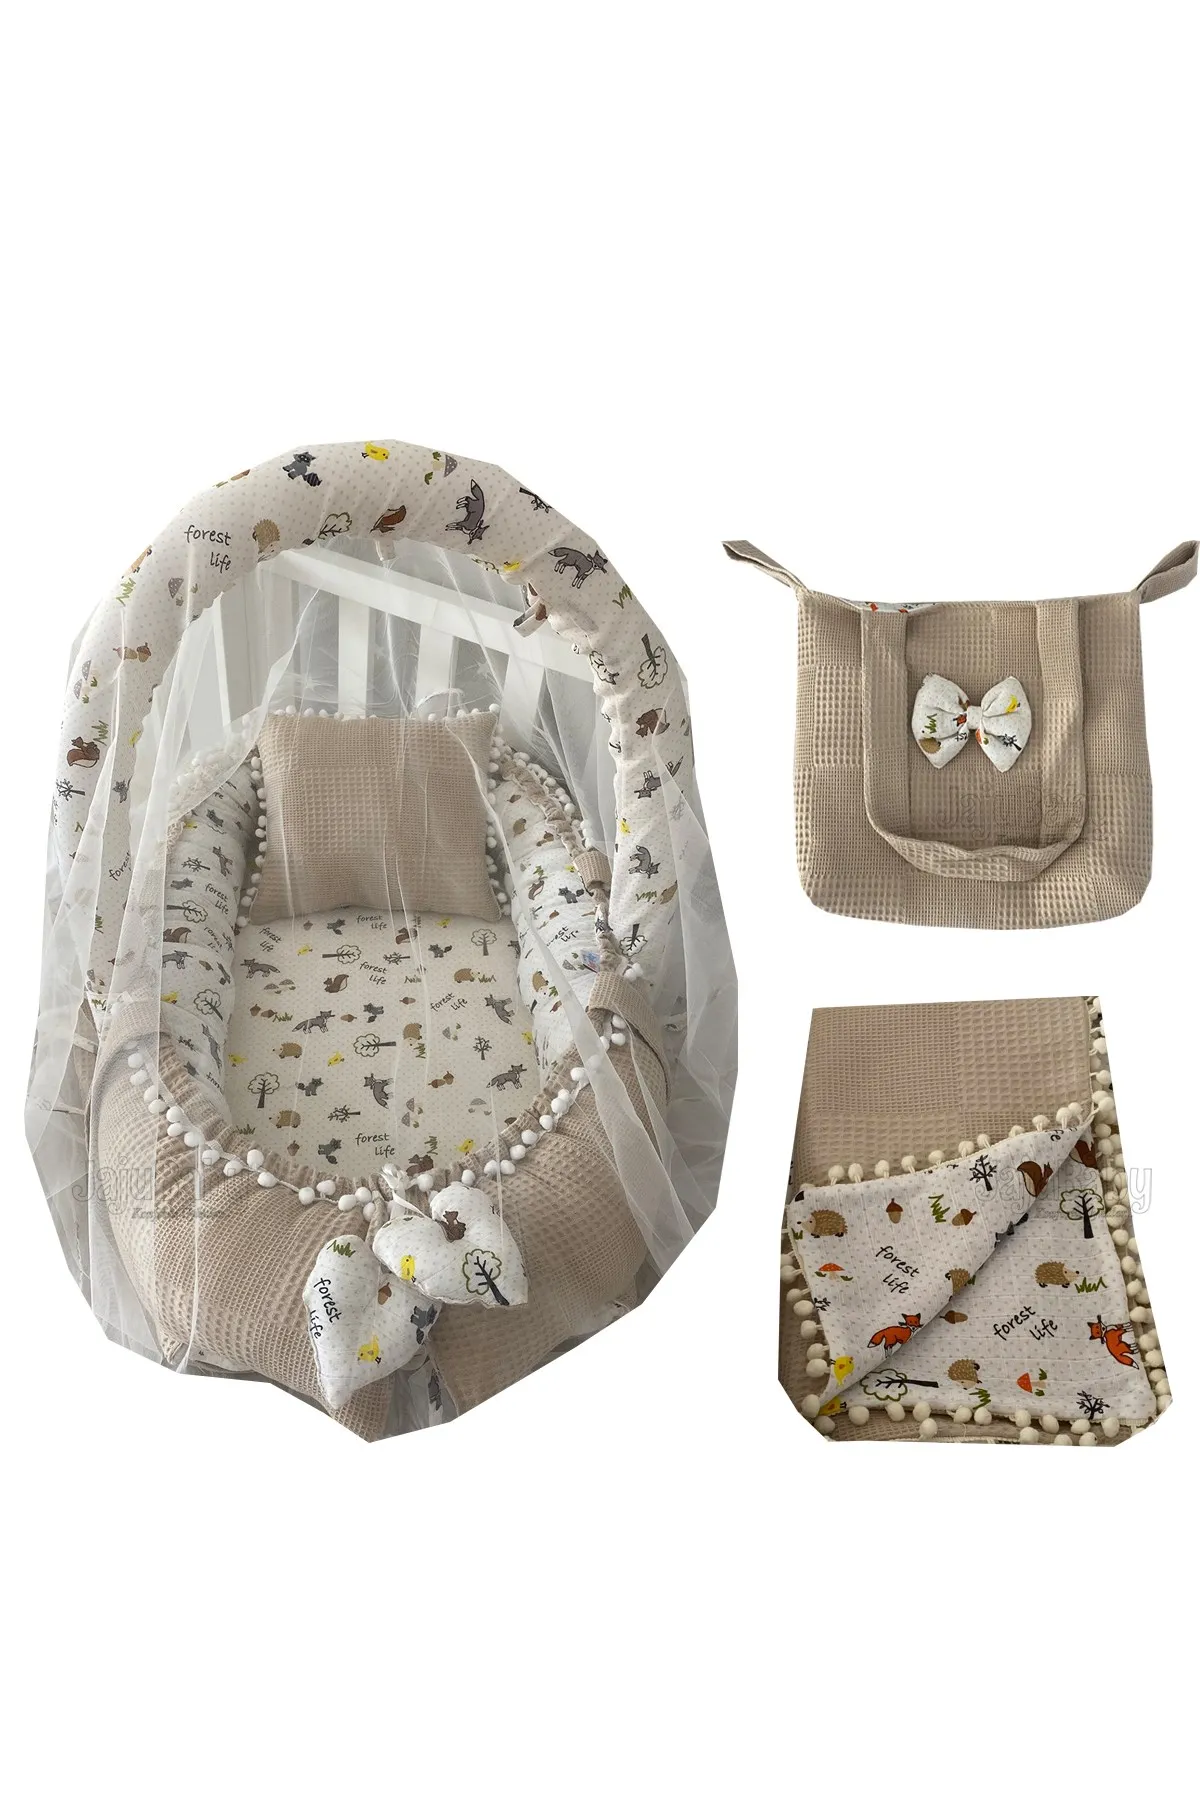 Jaju Baby Handmade Brown Pique Fabric and Muslin Fox Fabric Design PompomMosquito Net and Toy Apparatus 6 Pcs Babynest Set